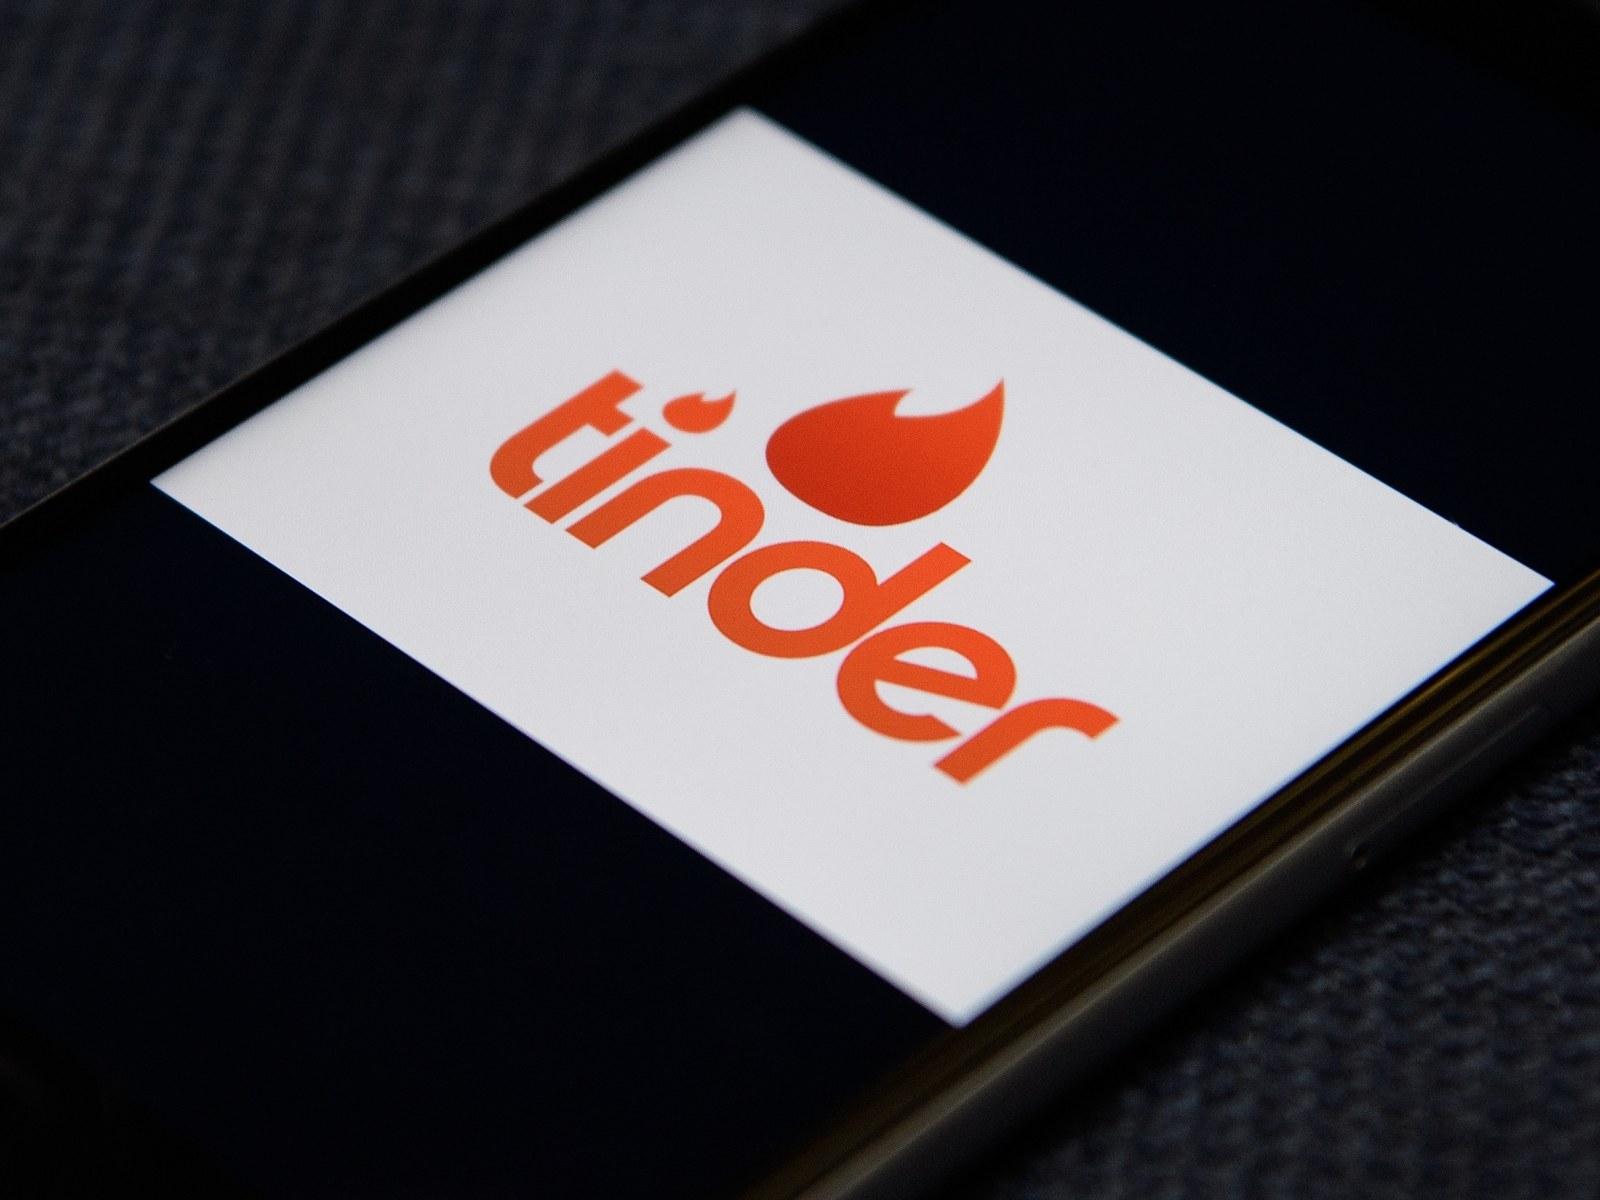 Kidnapped tinder Engadget is